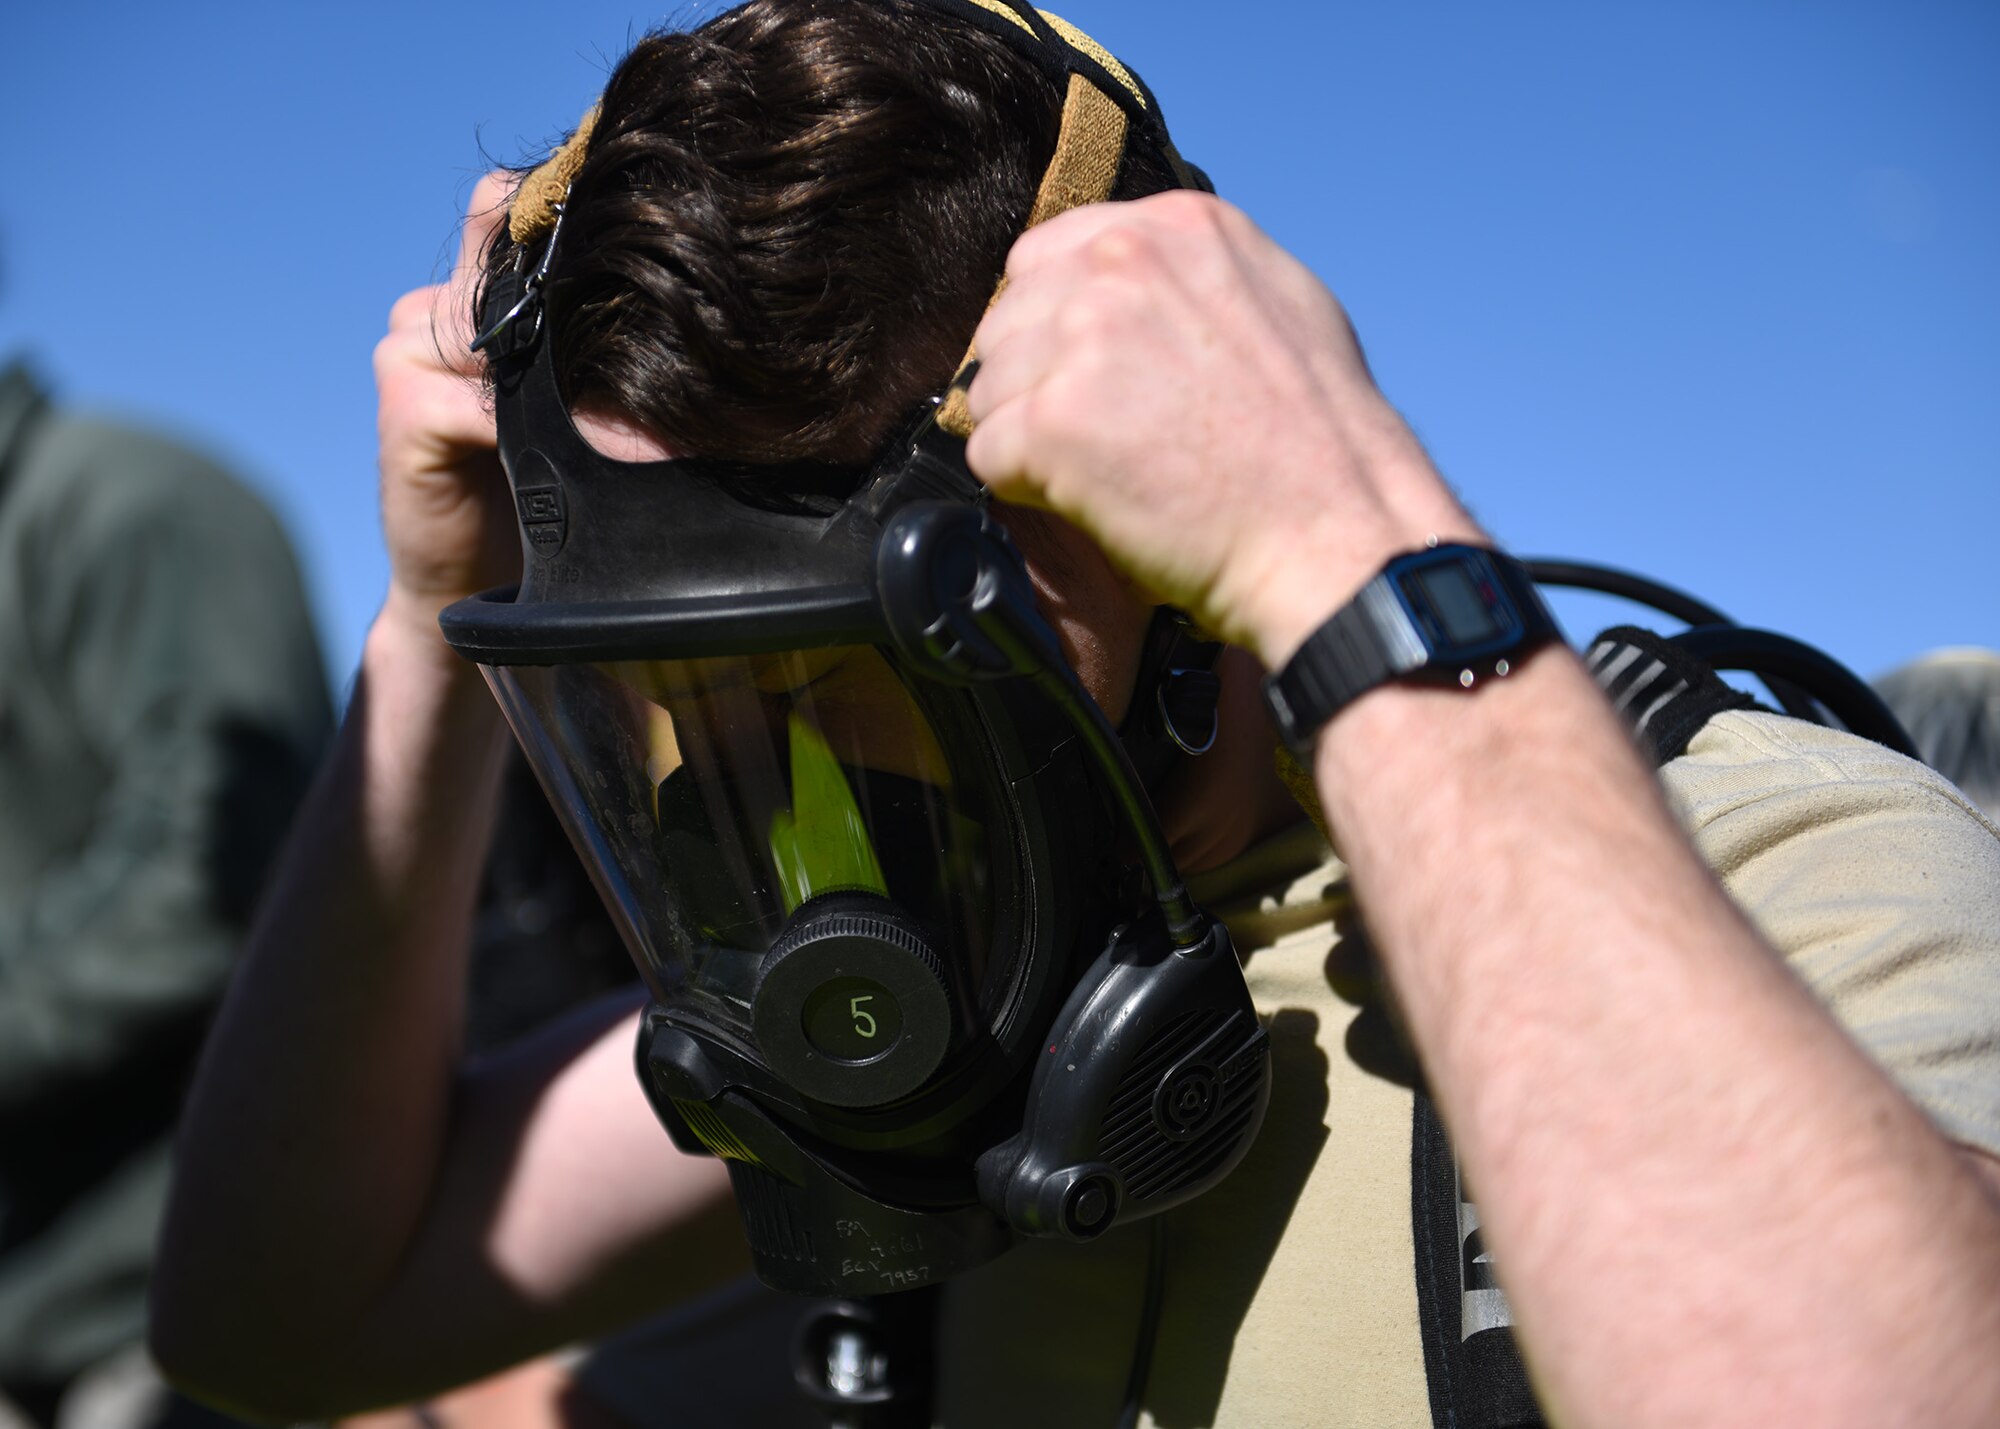 Airman Omar Thompson, 7th Operational Medical Readiness Squadron bioenvironmental engineering technician, puts on a gas mask during the 7th Medical Group’s chemical, biological, radiological and nuclear exercise at Dyess Air Force Base, Texas, March 6, 2020.